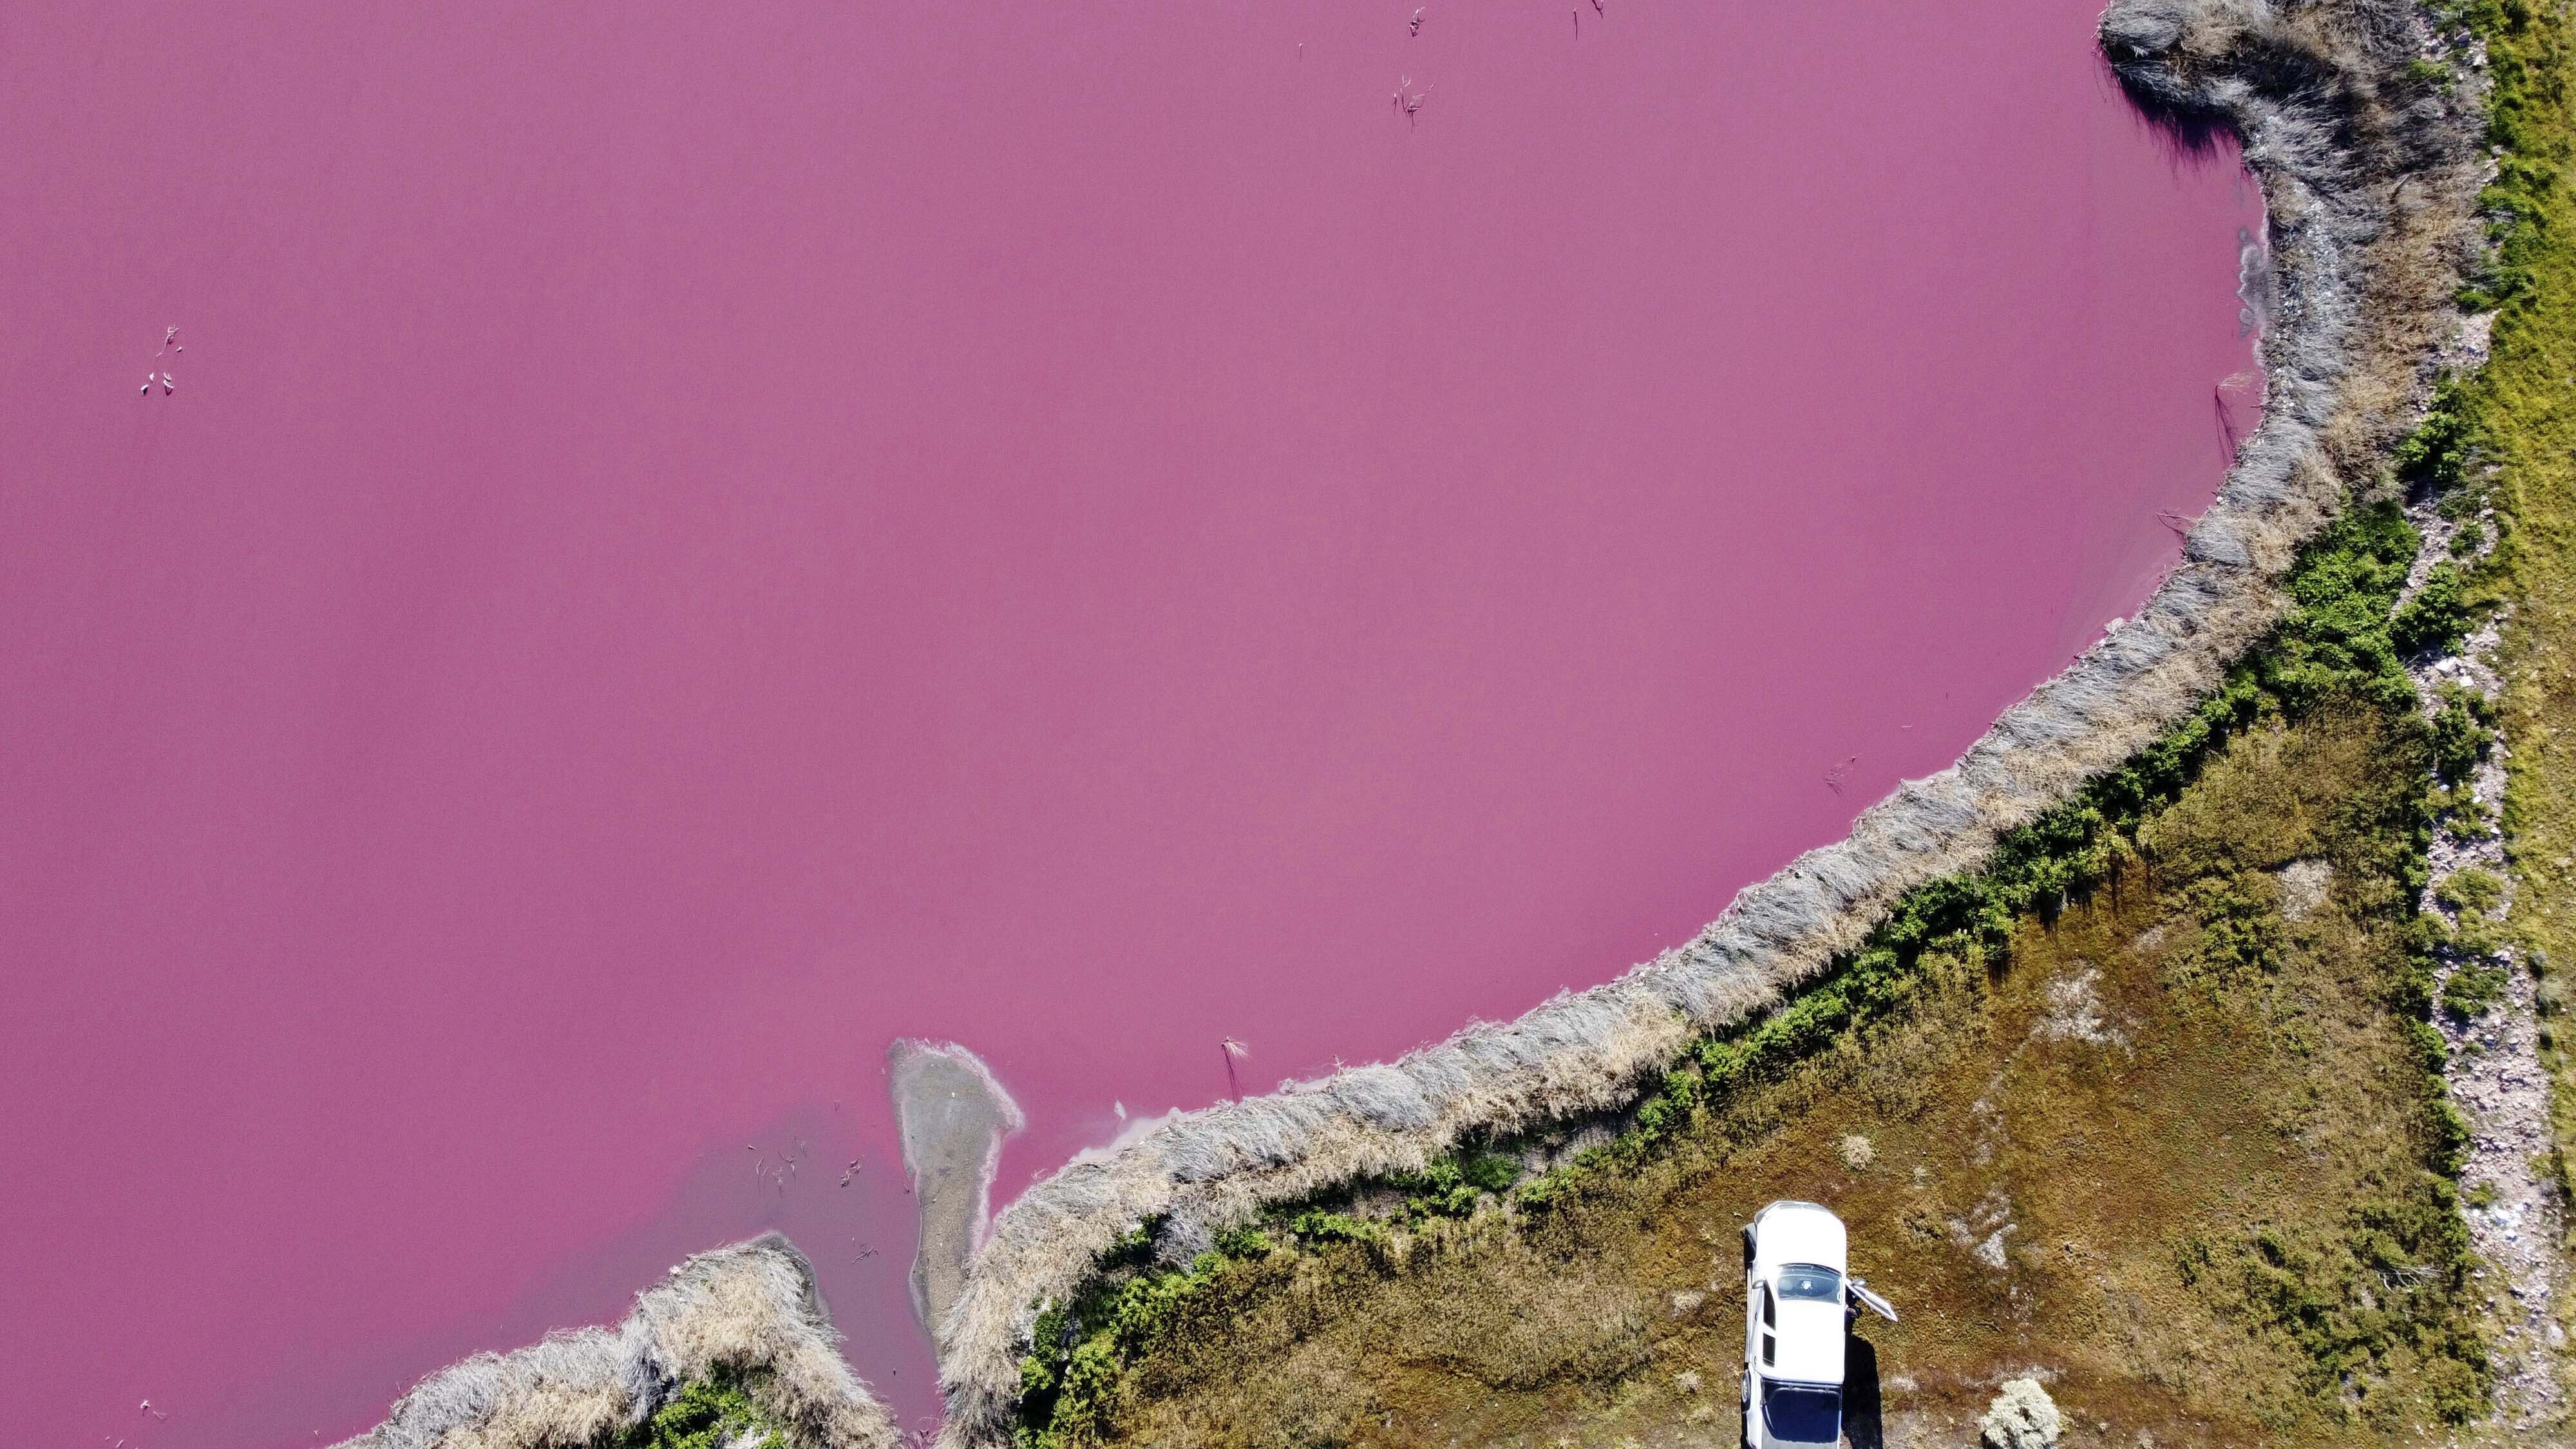 An aerial view of Corfo lagoon, which has turned a striking shade of pink as a result of what local environmentalists are attributing to increased pollution from a nearby industrial park, in Trelew, Chubut province, Argentina